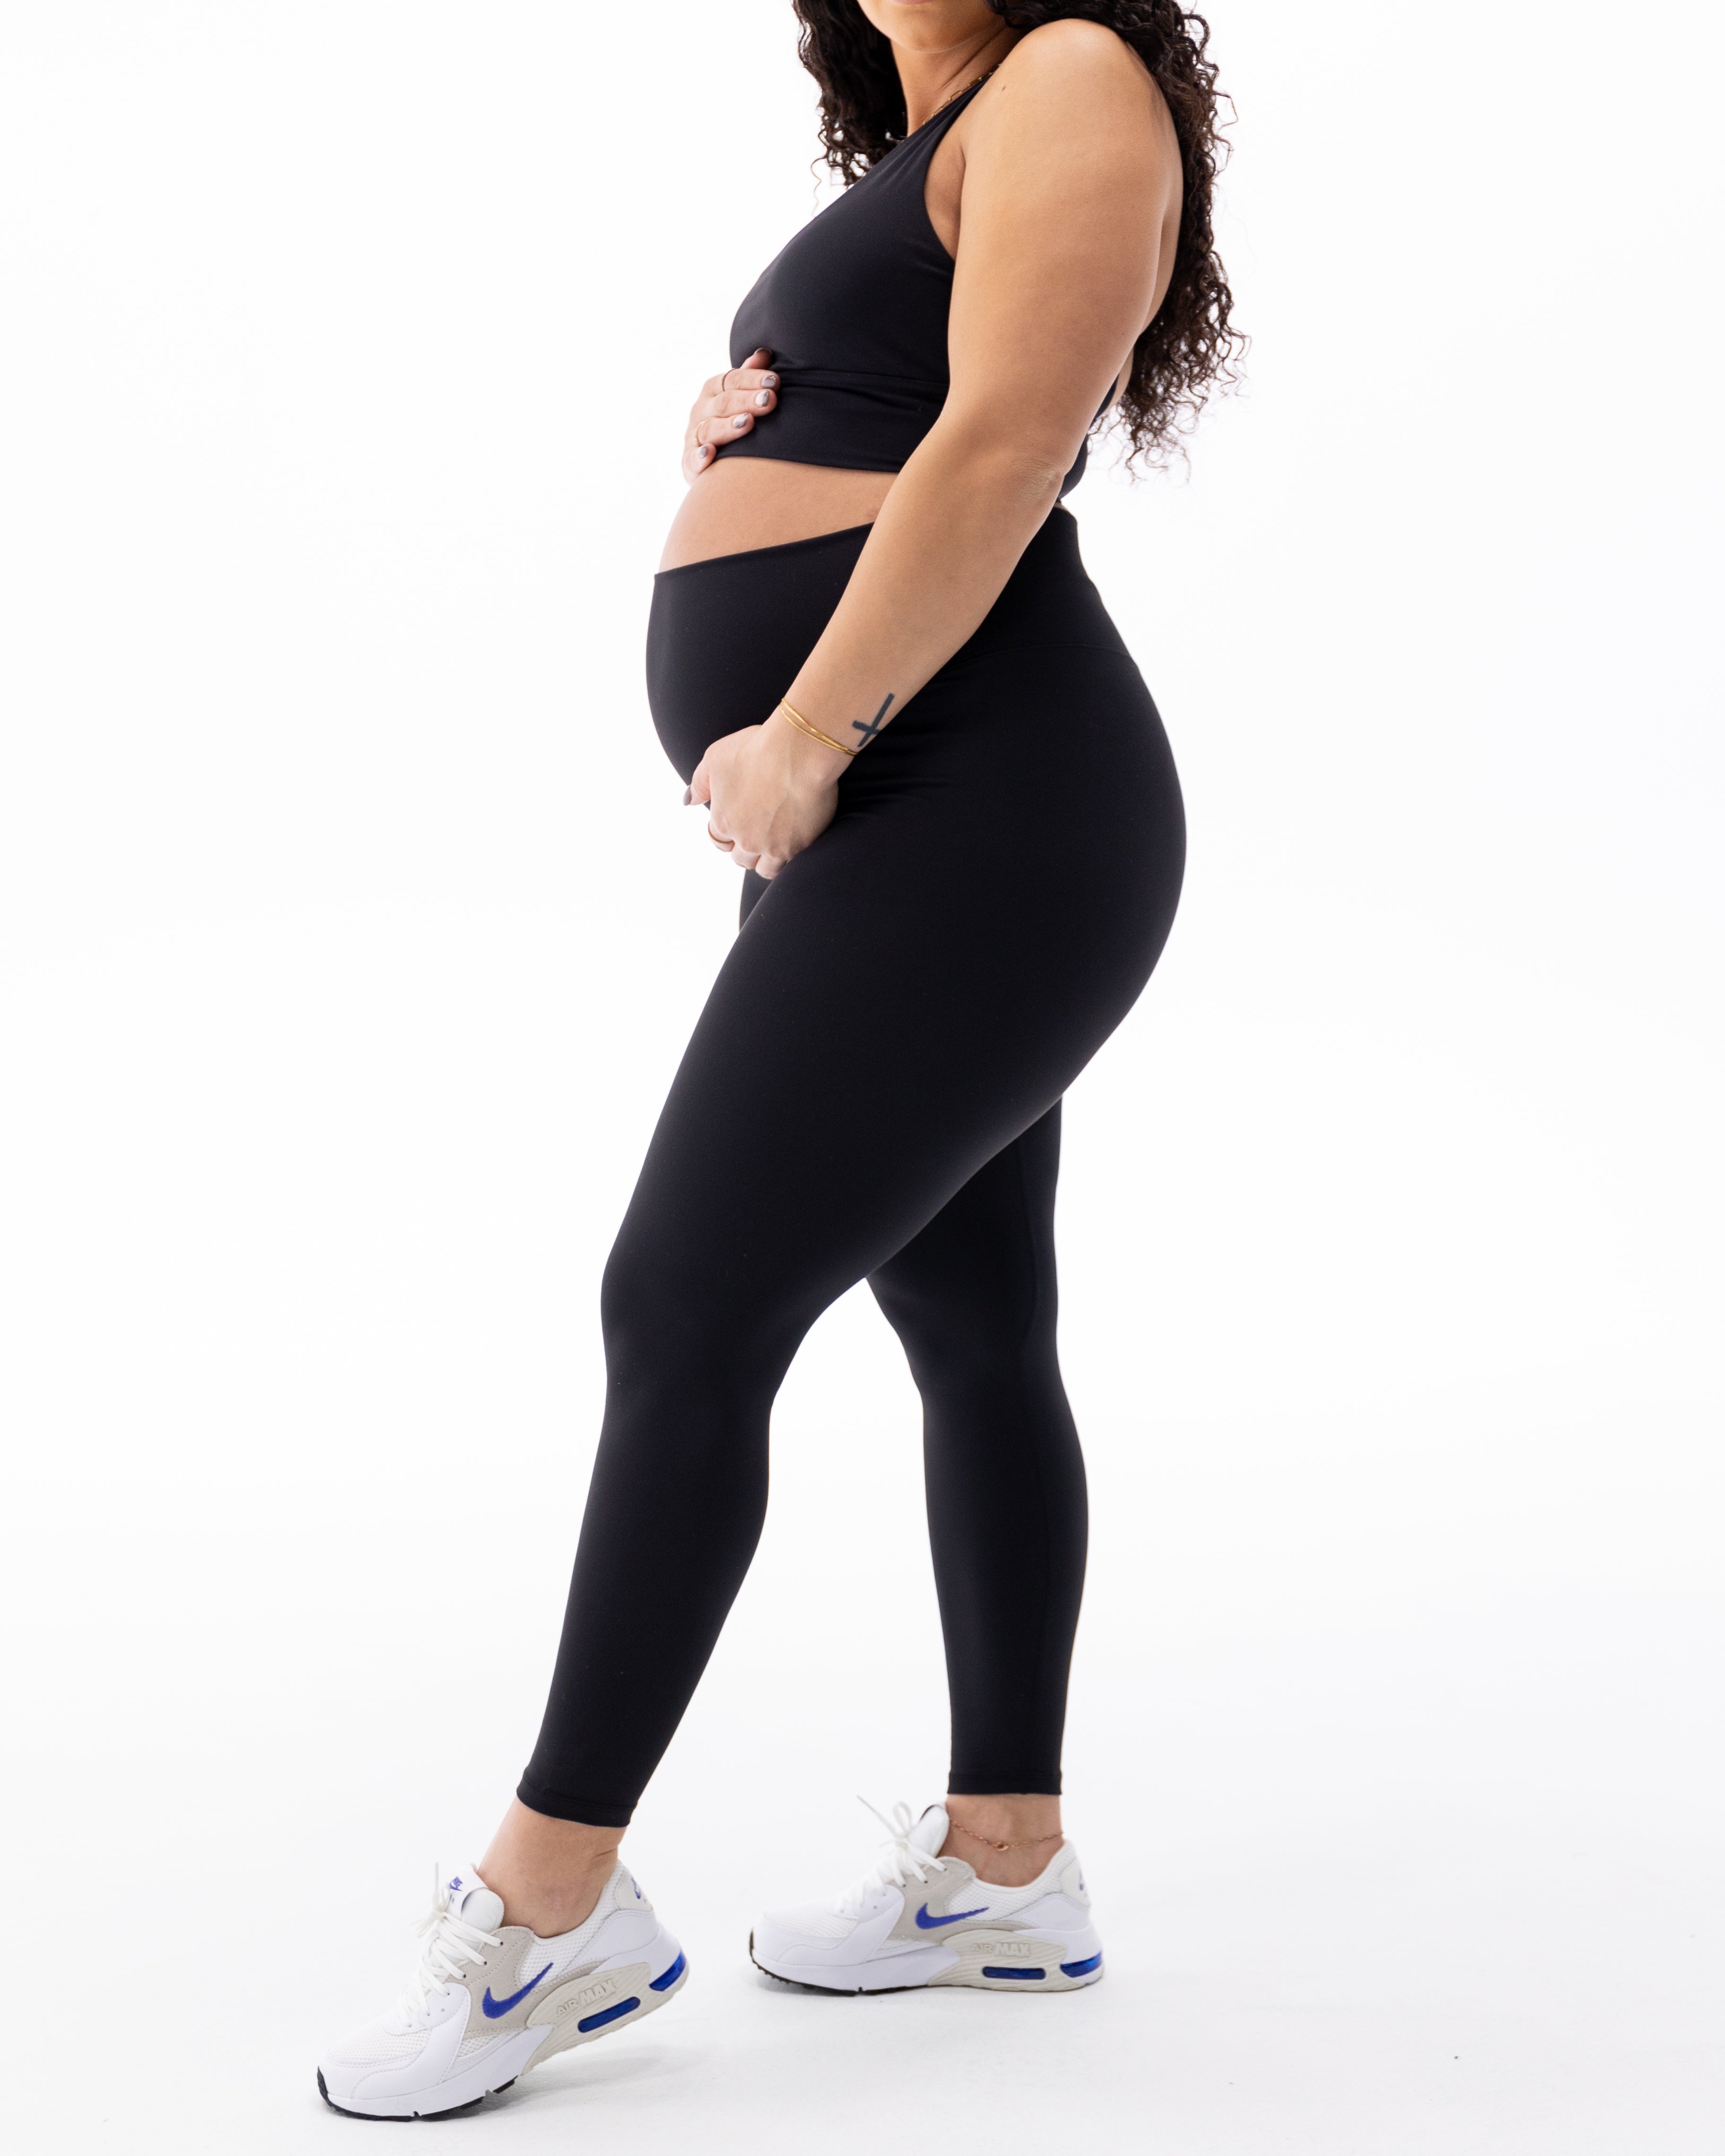 Carriwell Maternity Support Leggings Recycled, Black buy online